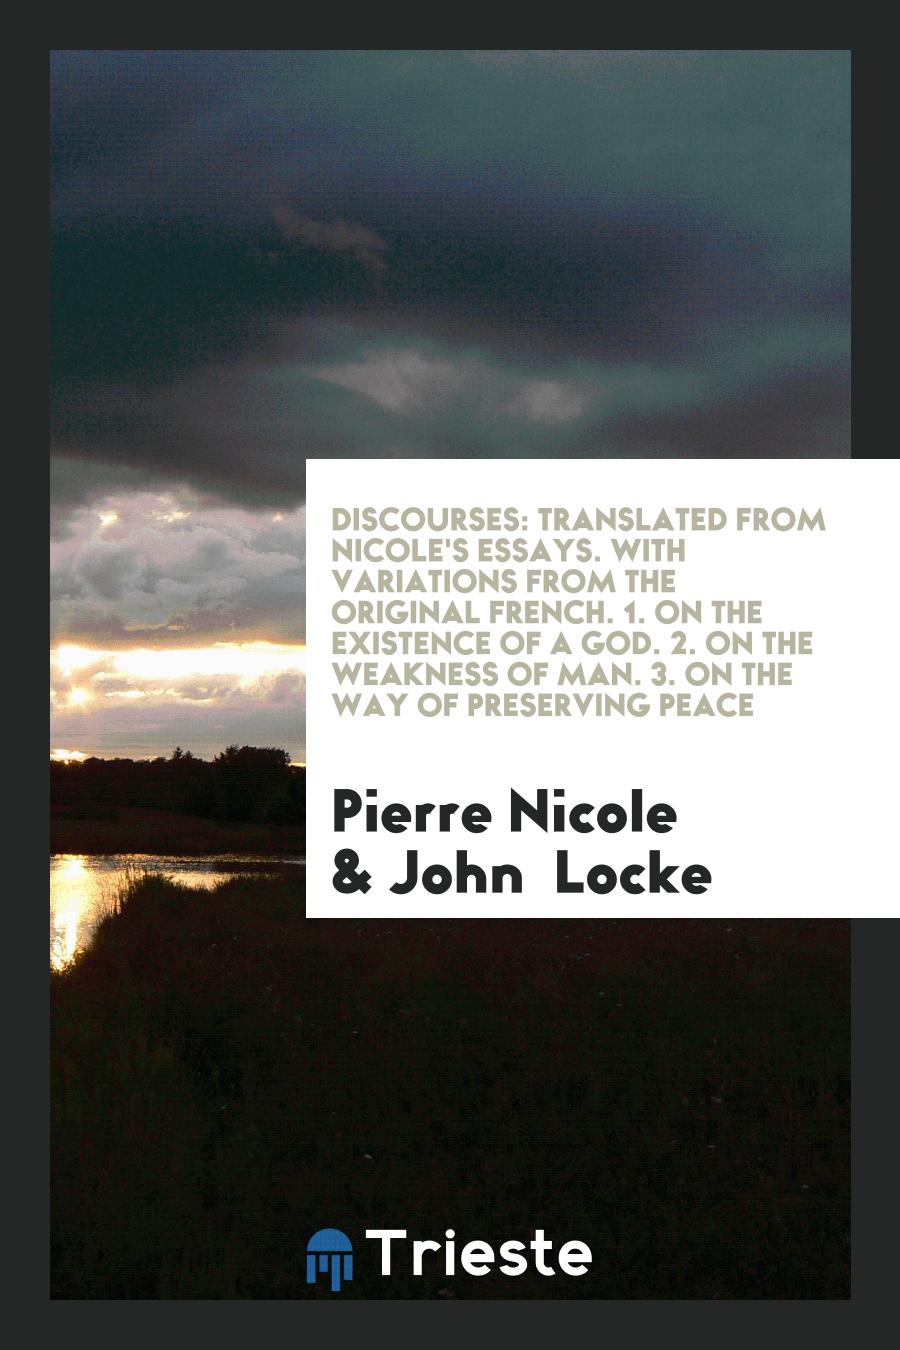 Discourses: Translated from Nicole's Essays. With Variations from the Original French. 1. On the Existence of a God. 2. On the Weakness of Man. 3. On the Way of Preserving Peace